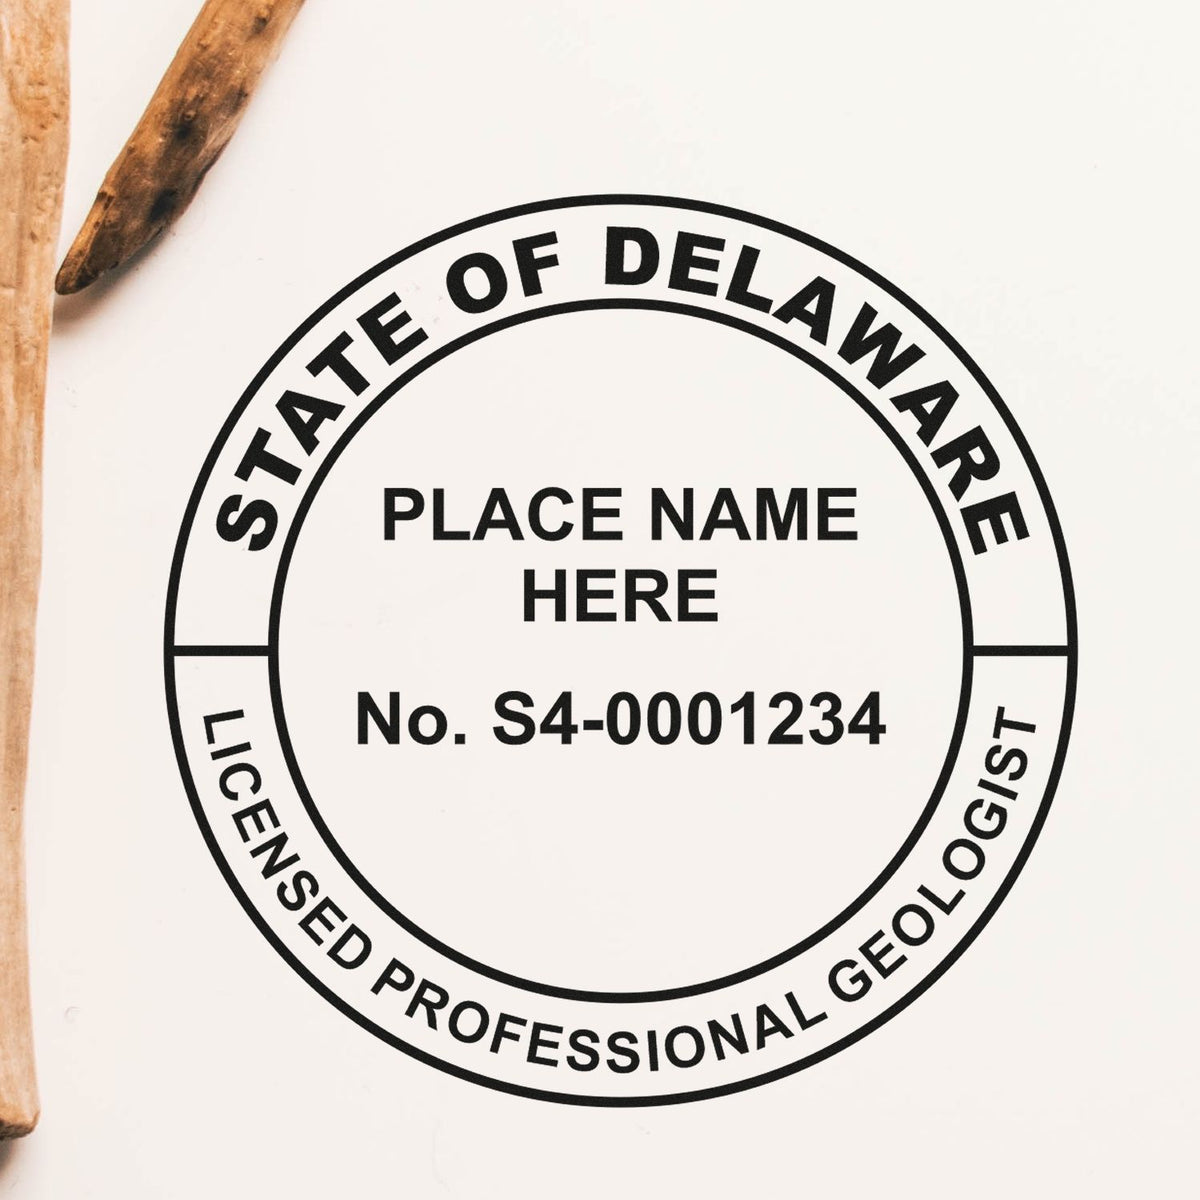 A photograph of the Slim Pre-Inked Delaware Professional Geologist Seal Stamp  impression reveals a vivid, professional image of the on paper.